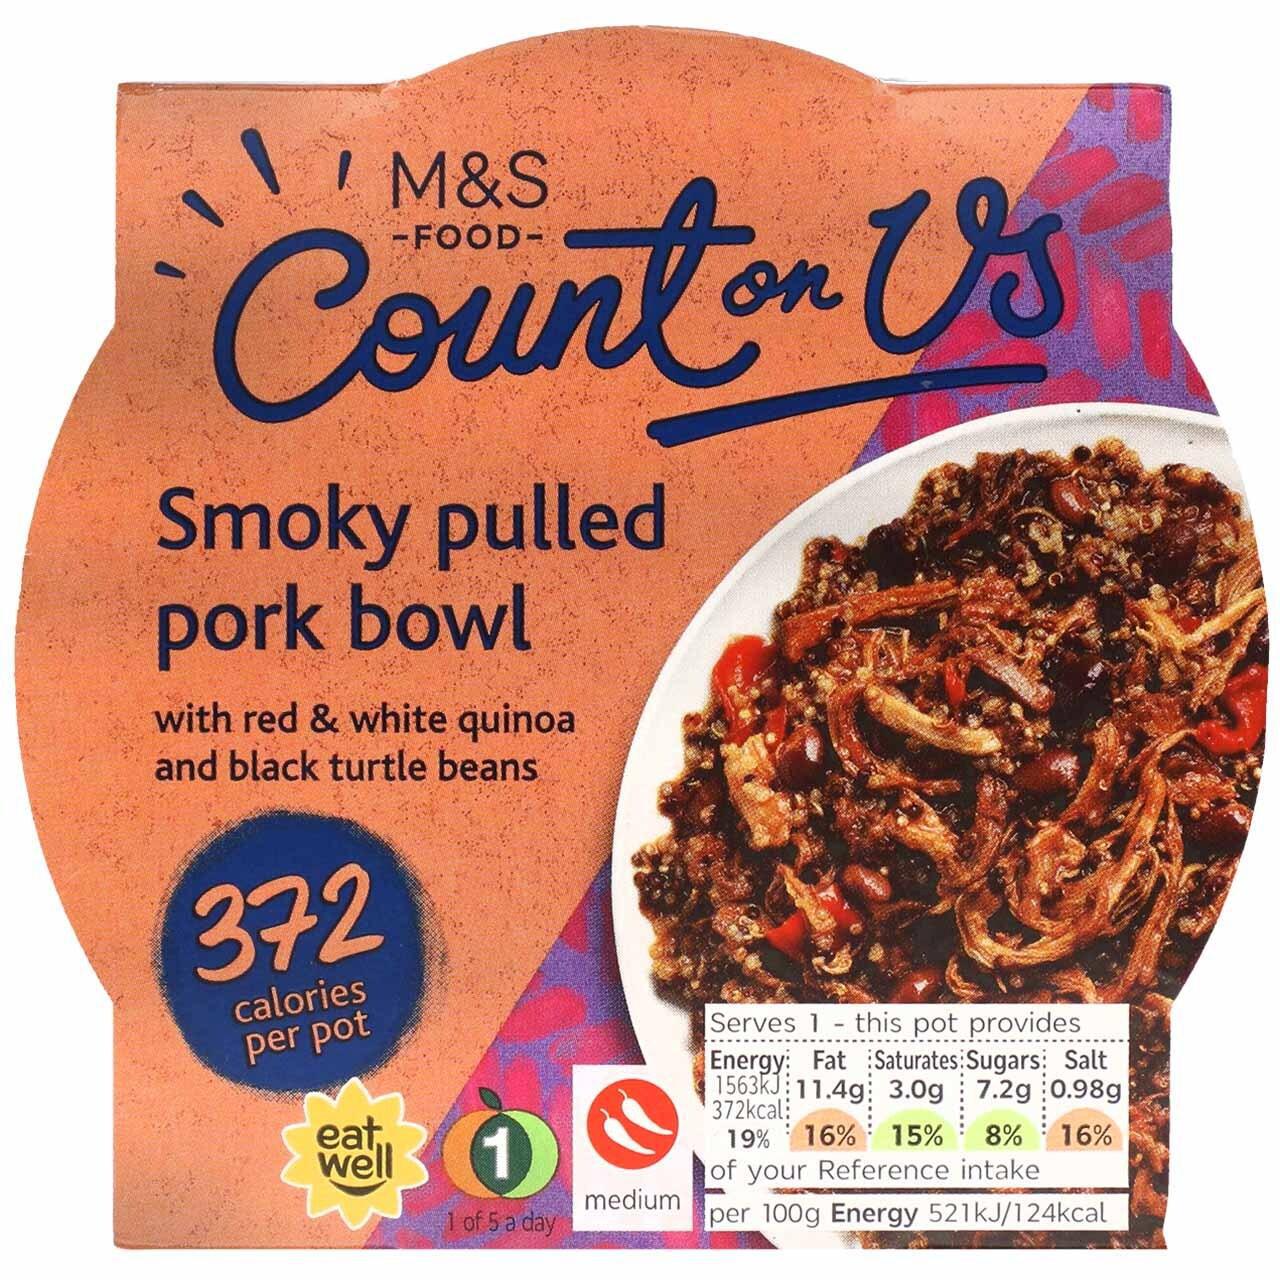 M&S Count On Us Smoky Pulled Pork Bowl 300g